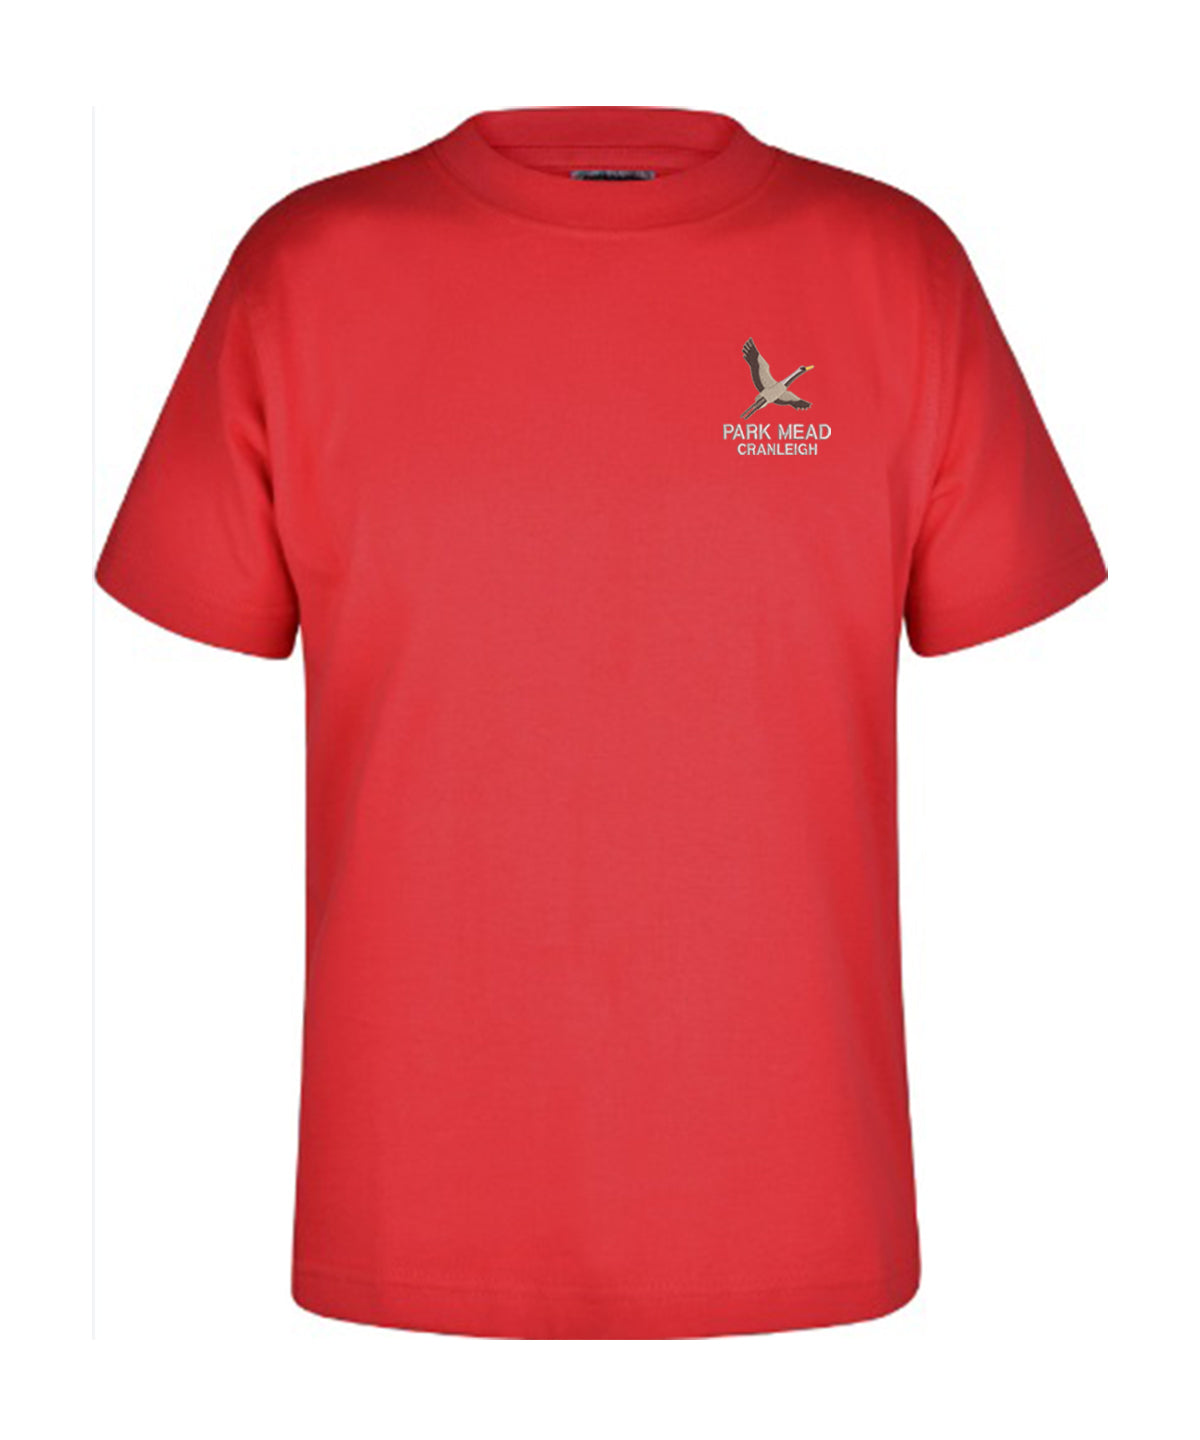 Park Mead Primary School - Unisex Cotton T Shirt - Red